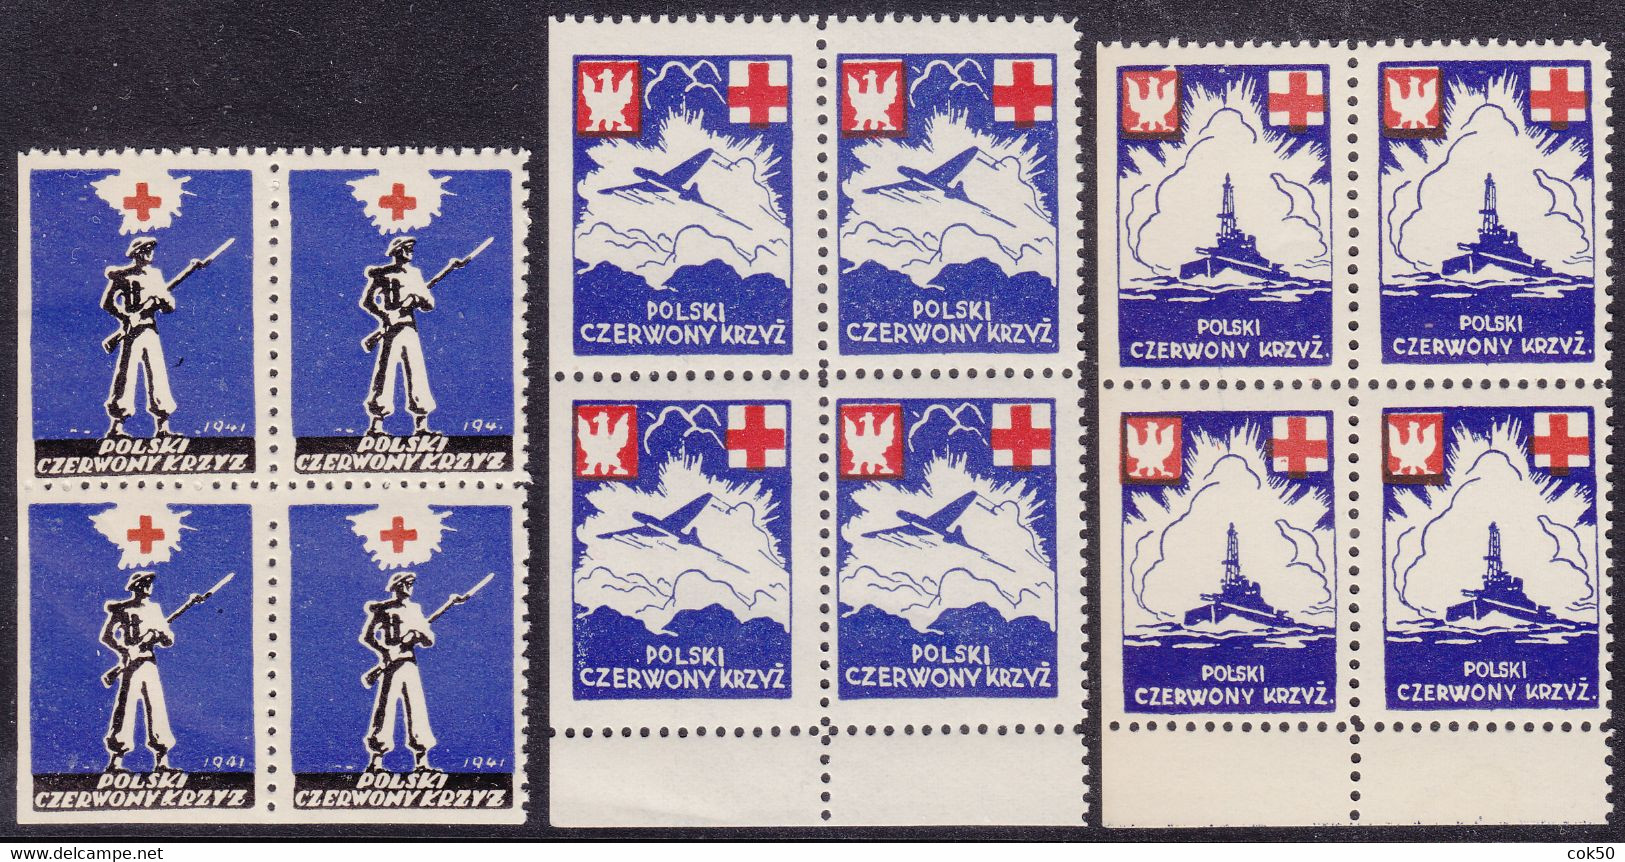 POLAND 1941 - Exile Governm. In London/Red Cross, MNH Lower LEFT Corner Bl.of 4, Two Stamps Perf. 3 Sides - Study Scan ! - Gouvernement De Londres (exil)